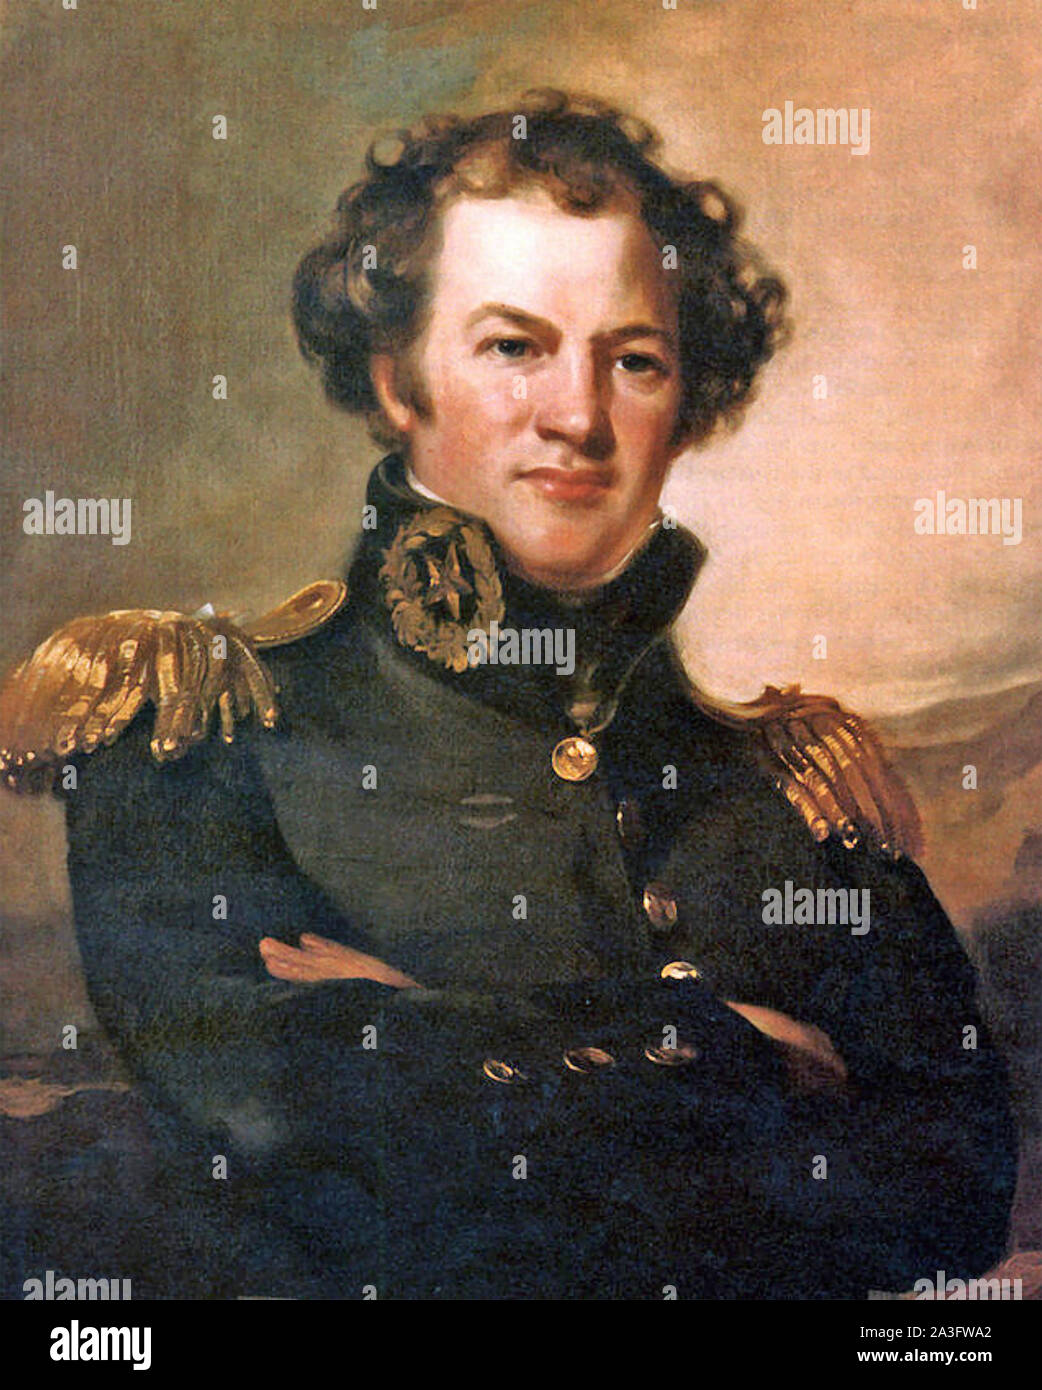 ALEXANDER MACOMB (1782-1841) Commanding General of the United Sates Army 1828-1841. An 18239 portrait by Thomas Sully Stock Photo